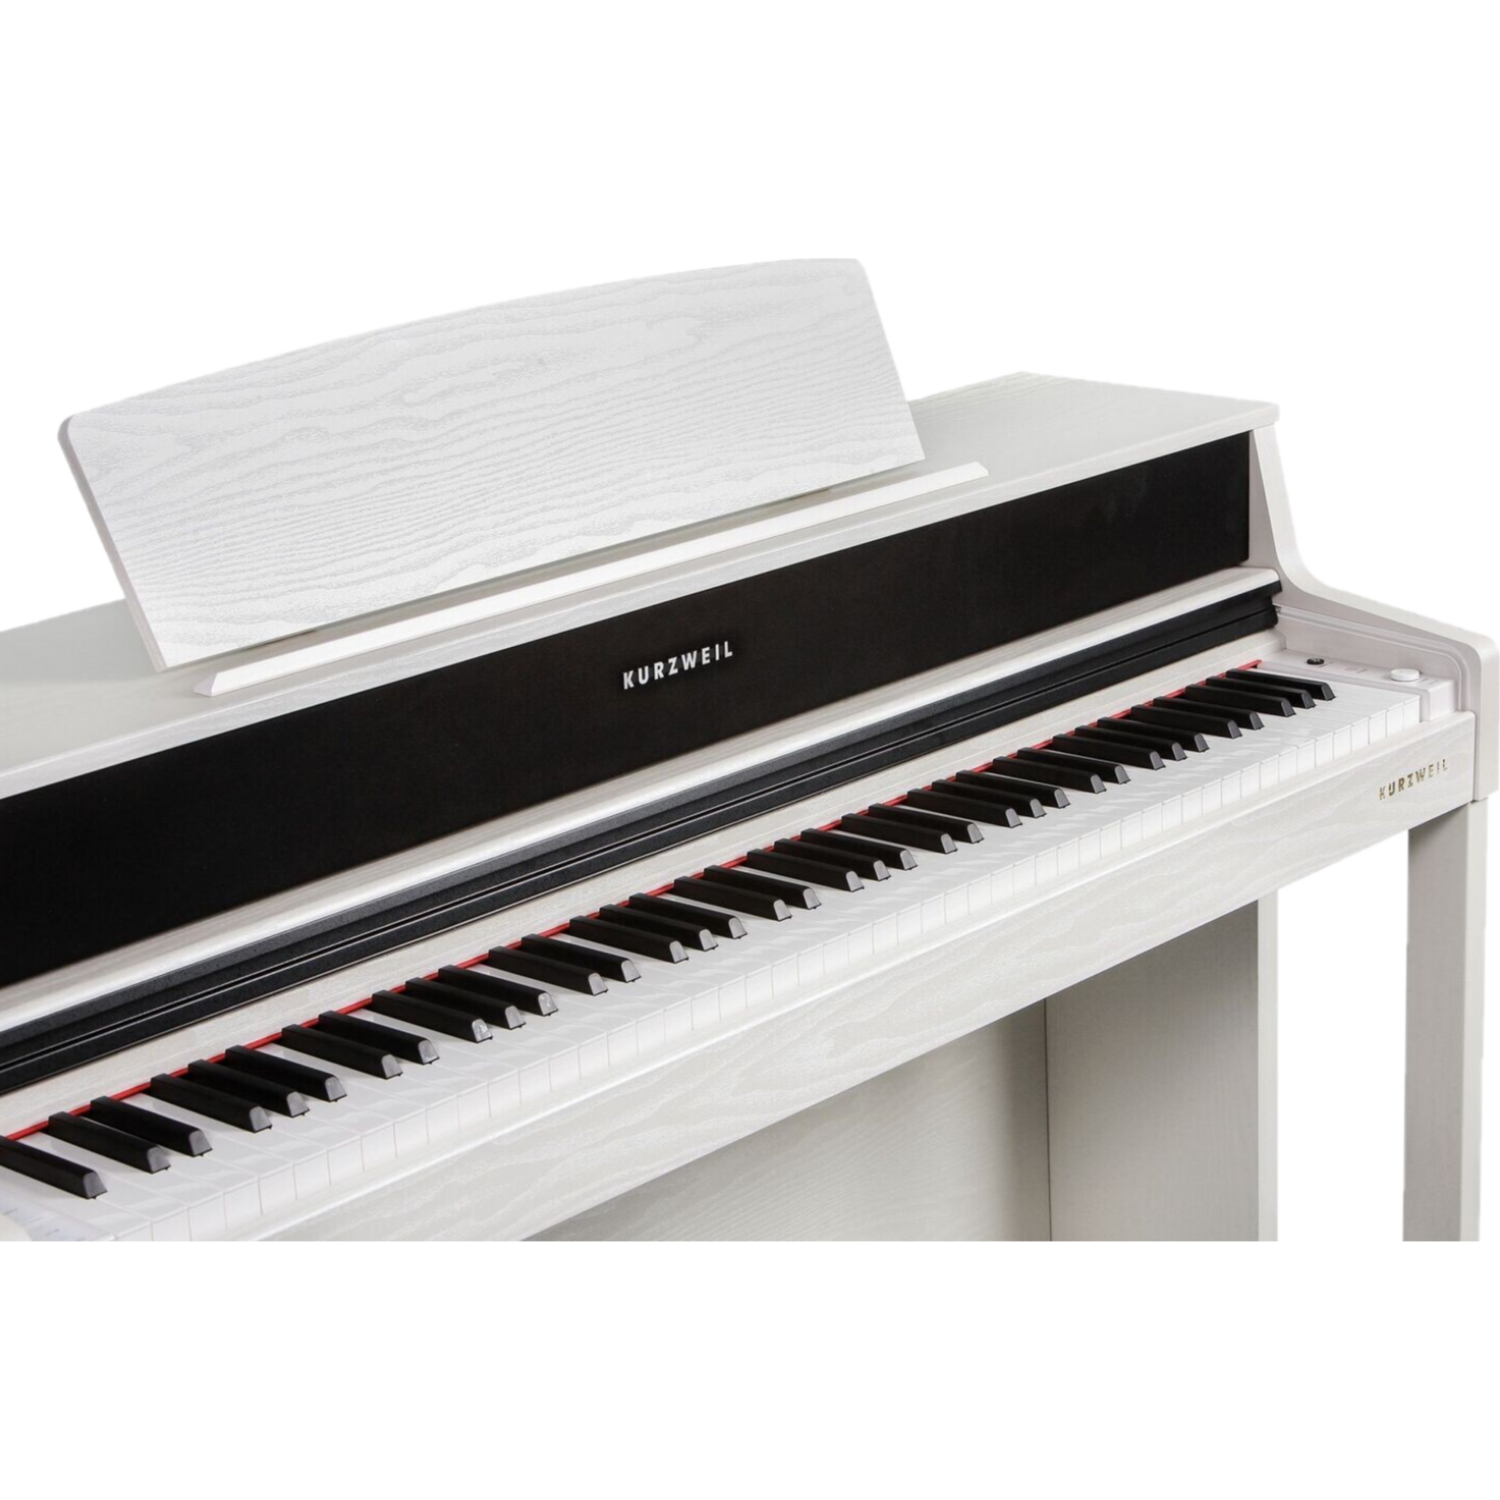 The Sonic Art Music Store - Kurzweil CUP410-WH Piano